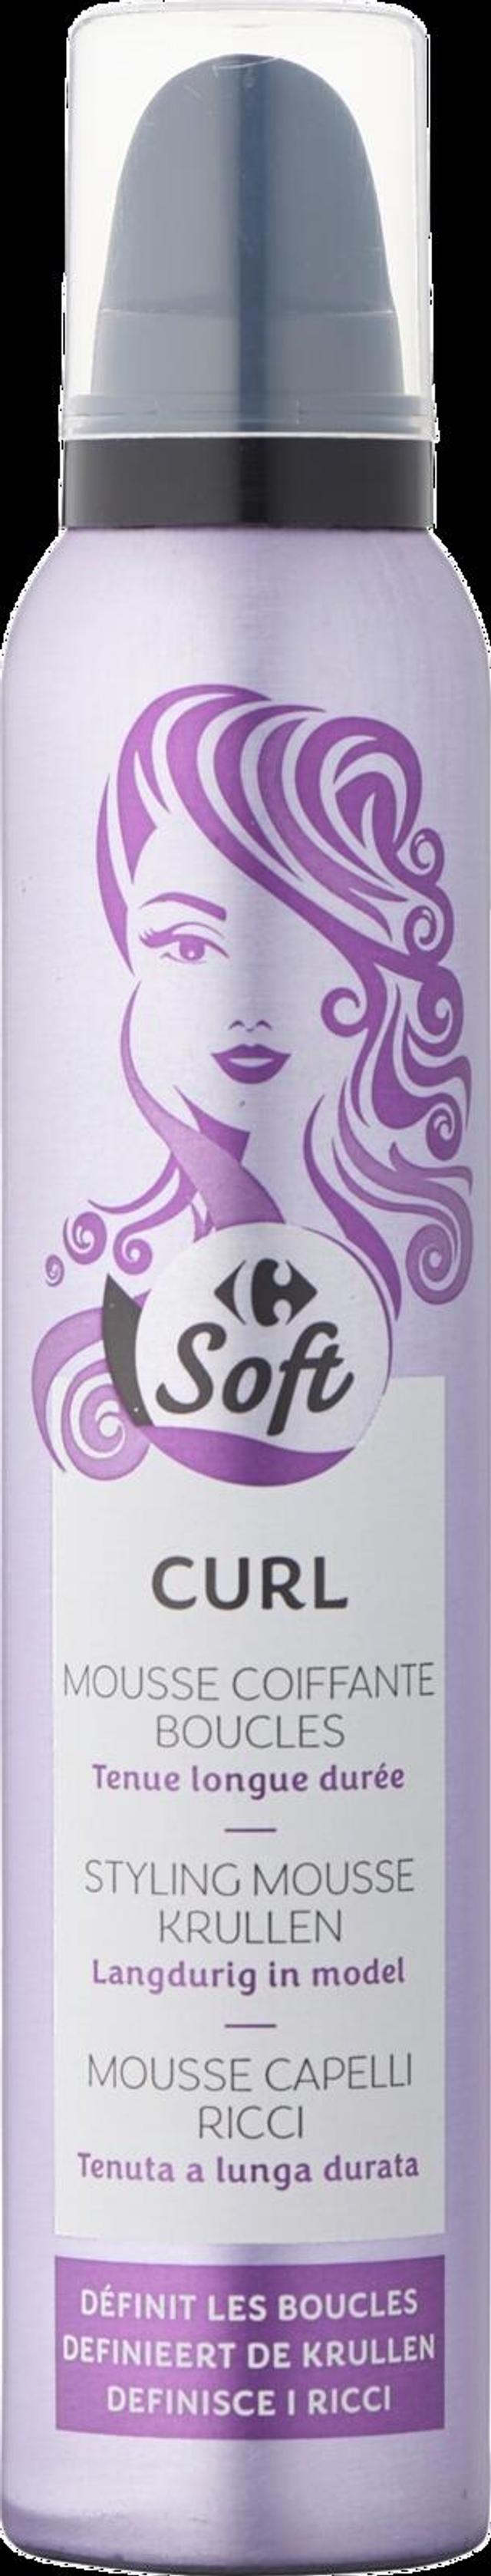 Carrefour Soft Curl muotovaahto 200 ml